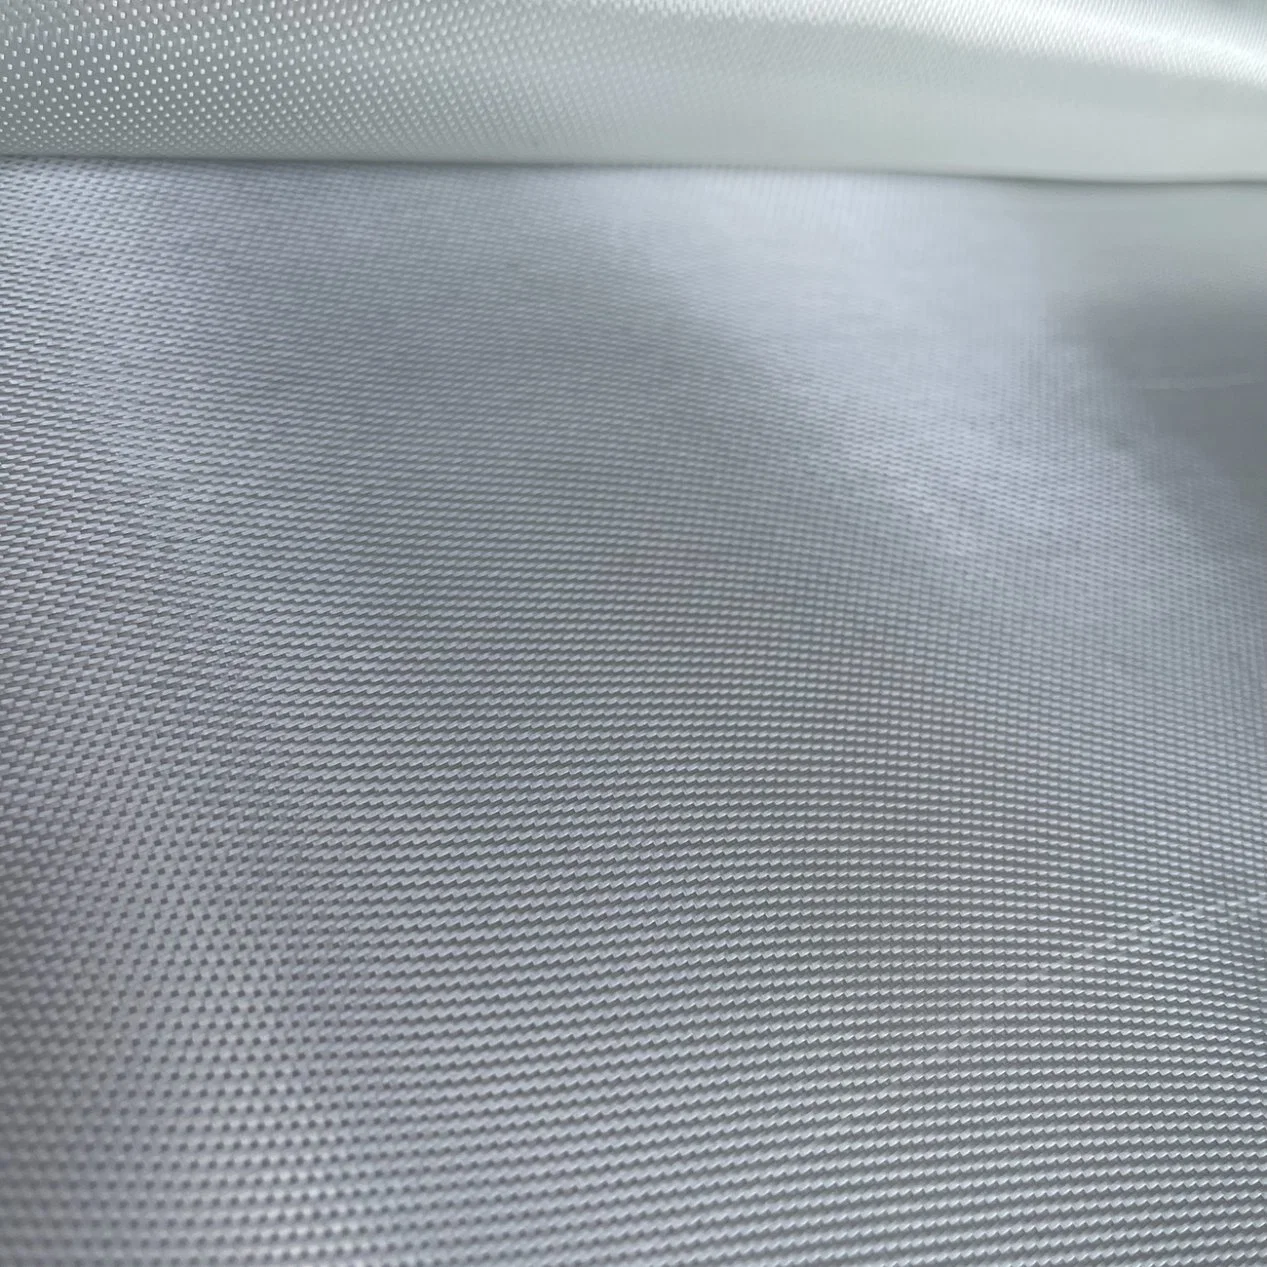 China High Quality Fiberglass Cloth 7781 E-Glass for Aerospace/Automotive Industry/Construction Industry